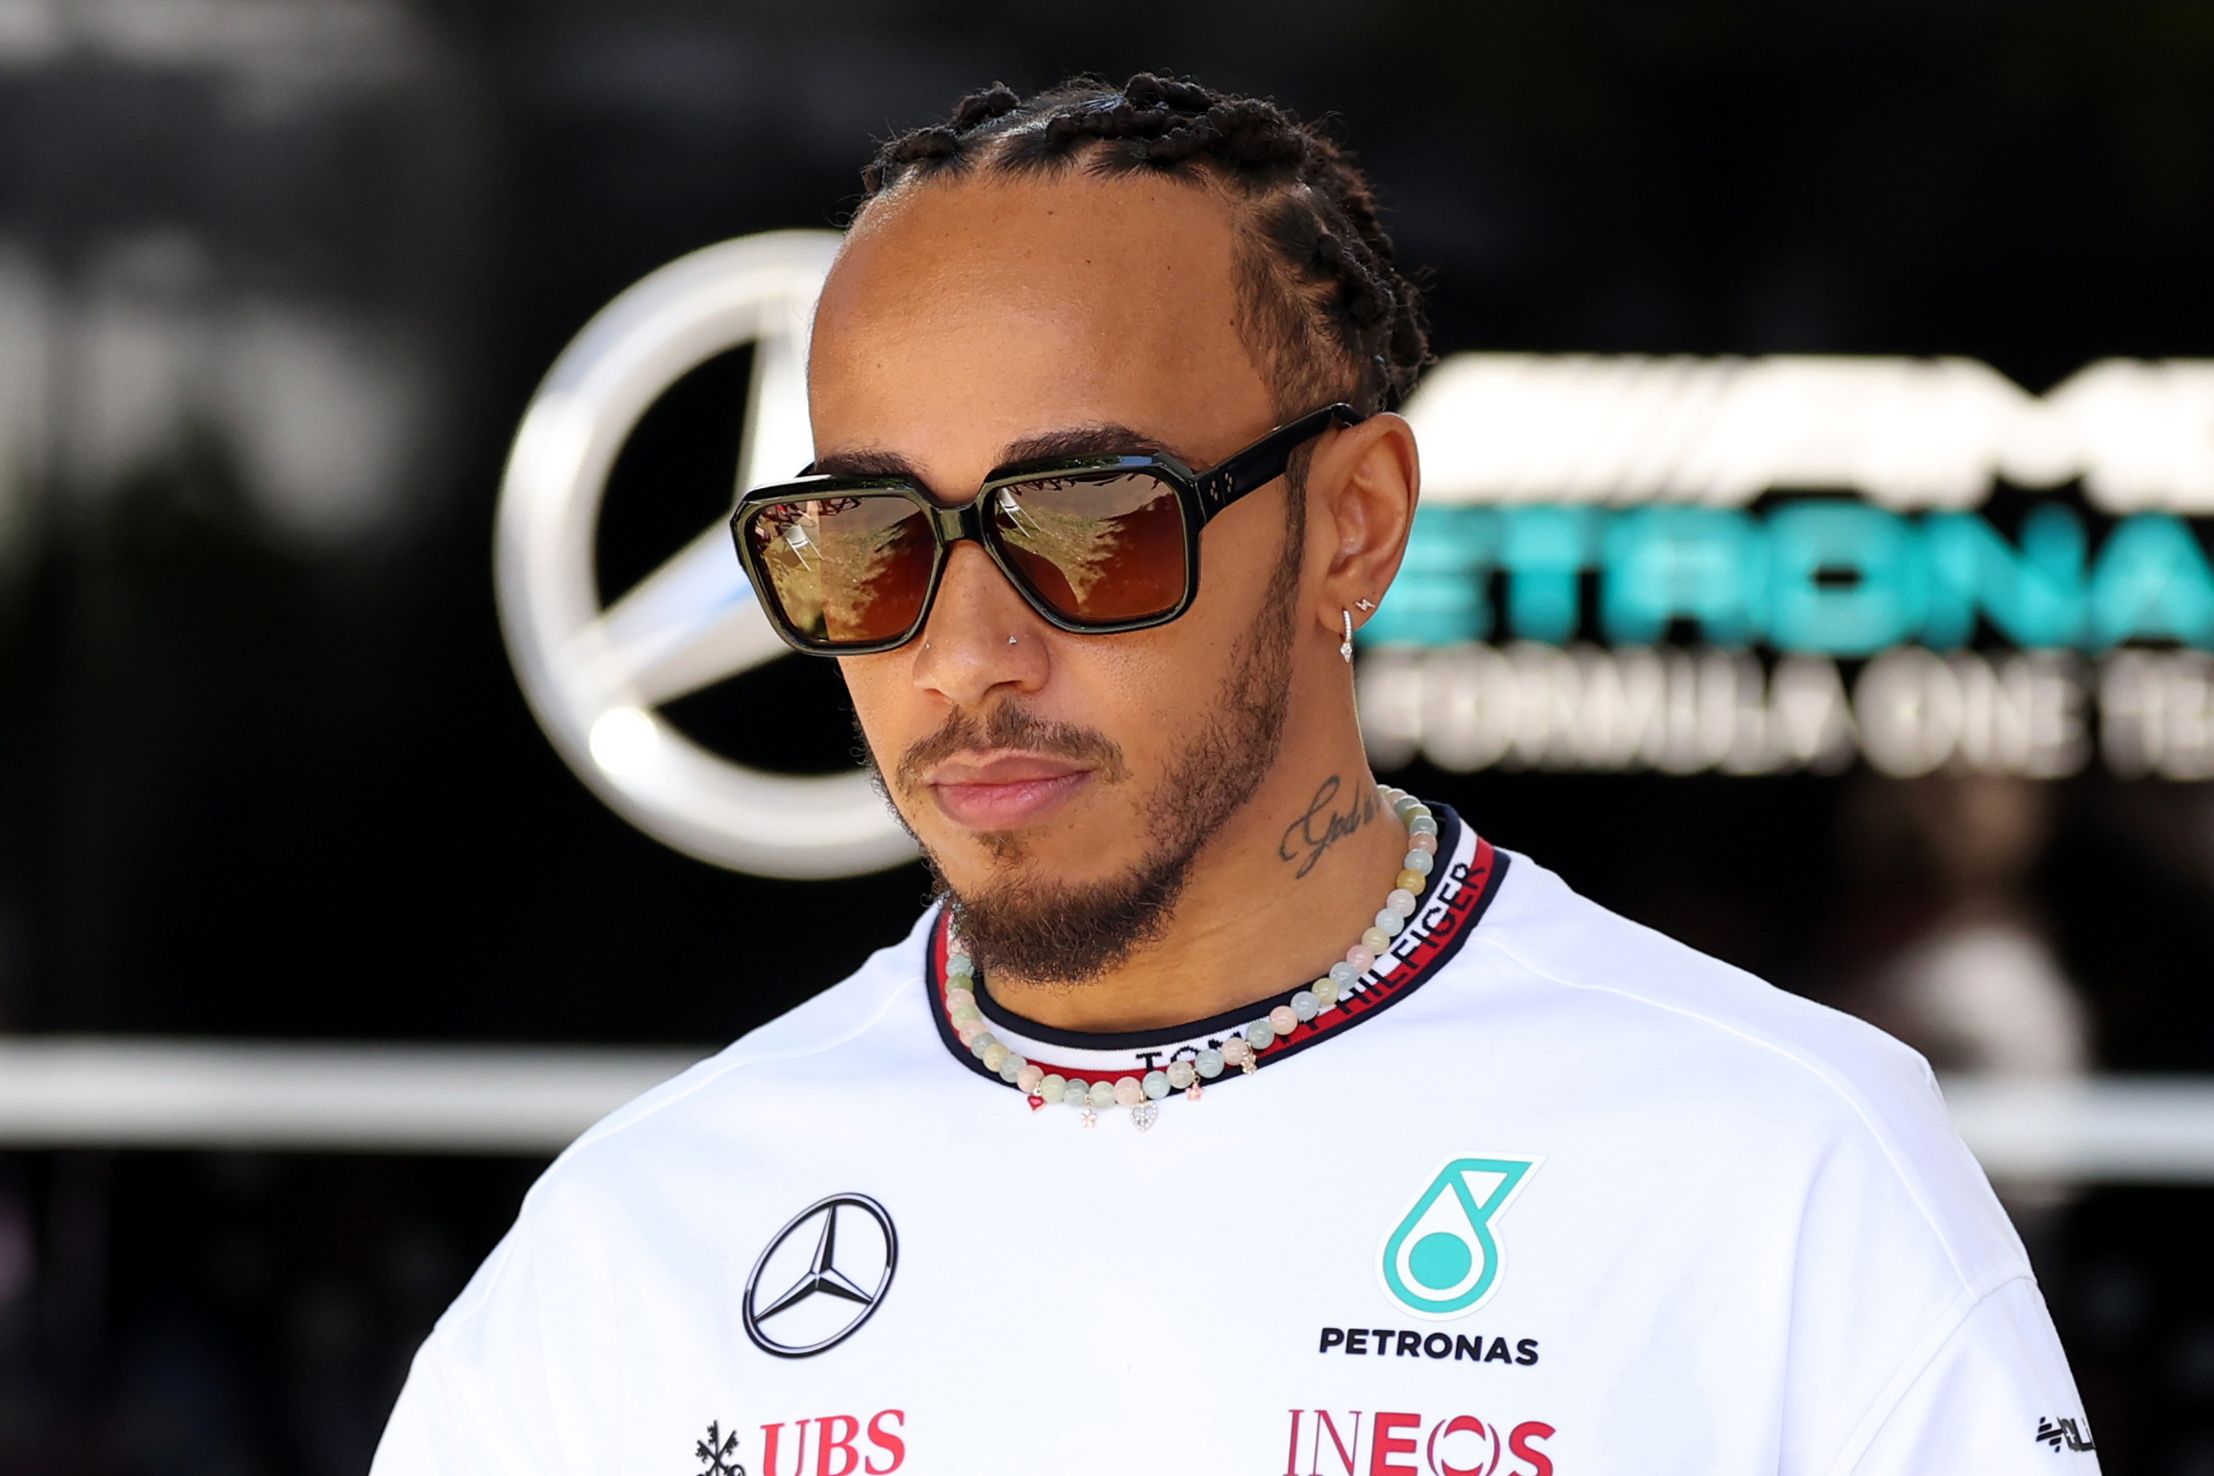 'No accountability': Lewis Hamilton rips FIA over off-track scandals